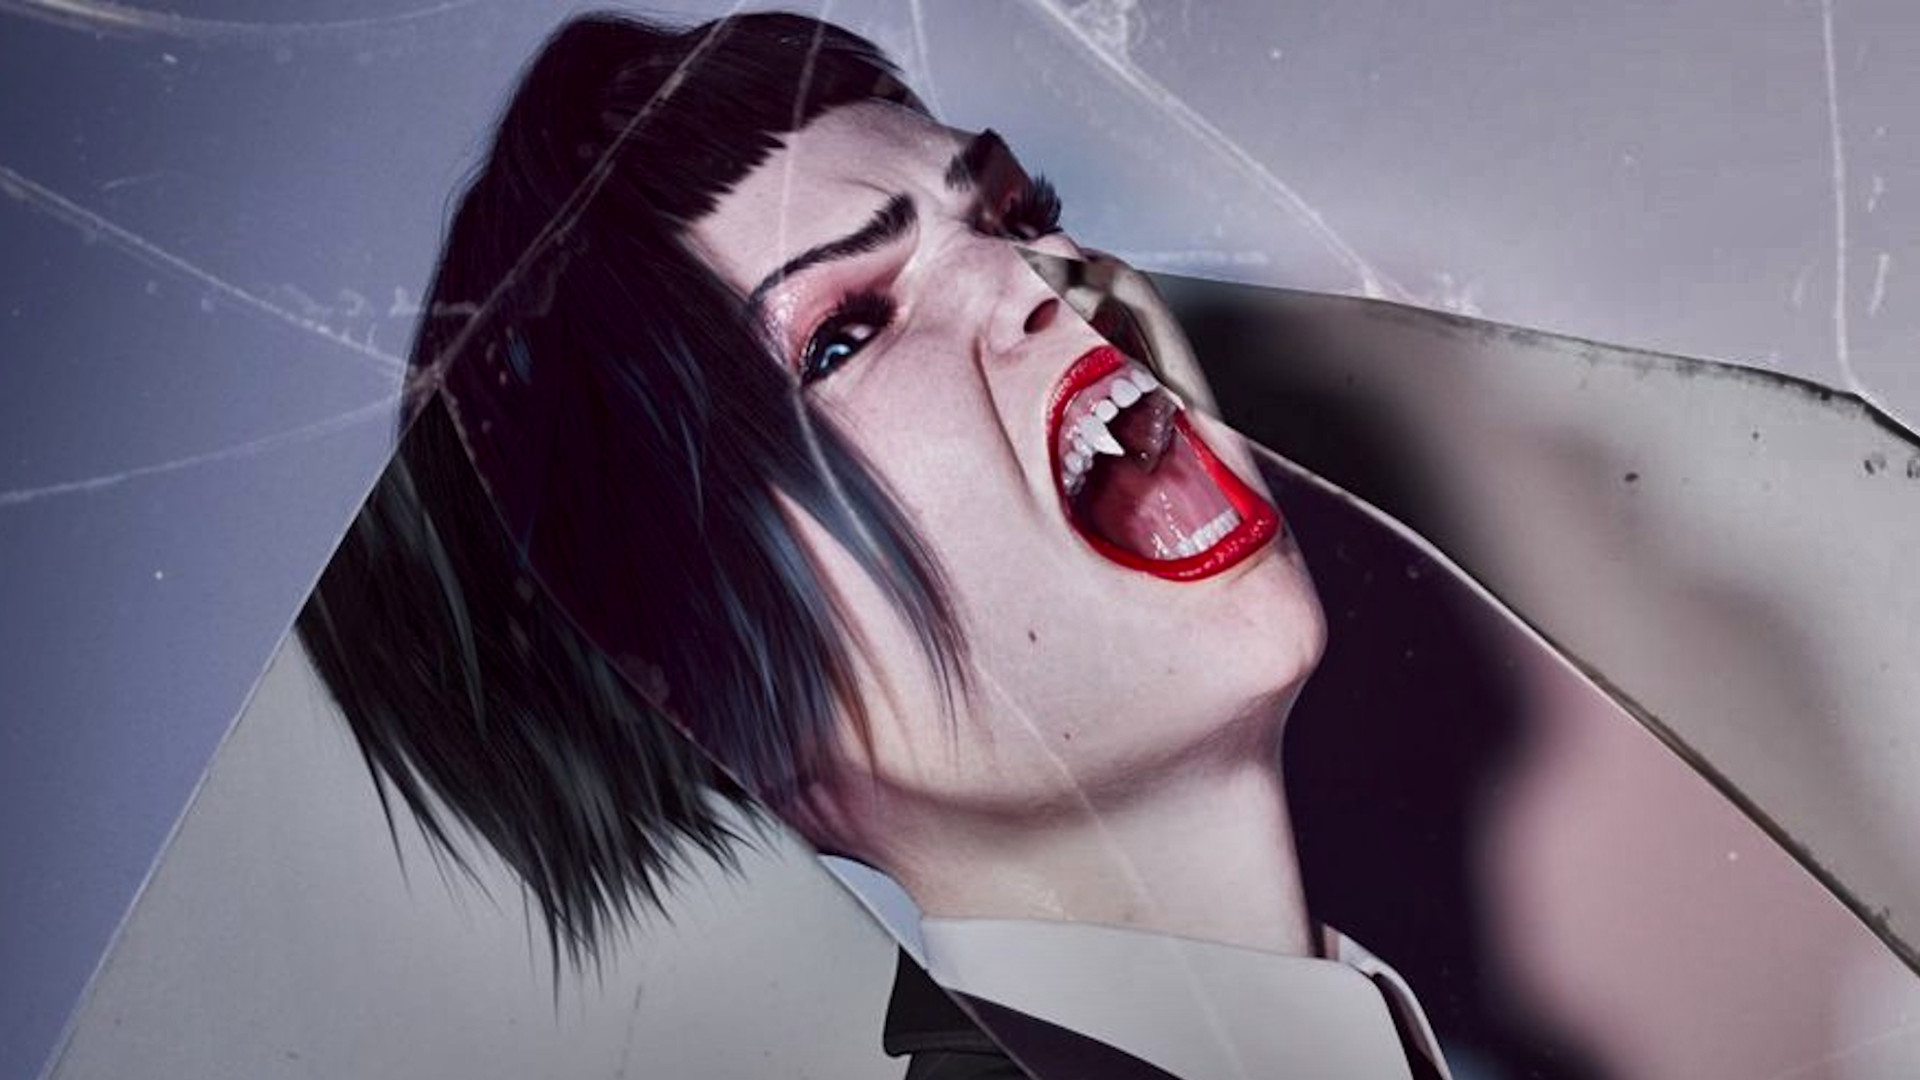 Vampire: The Masquerade -- Swansong review: A dense meal